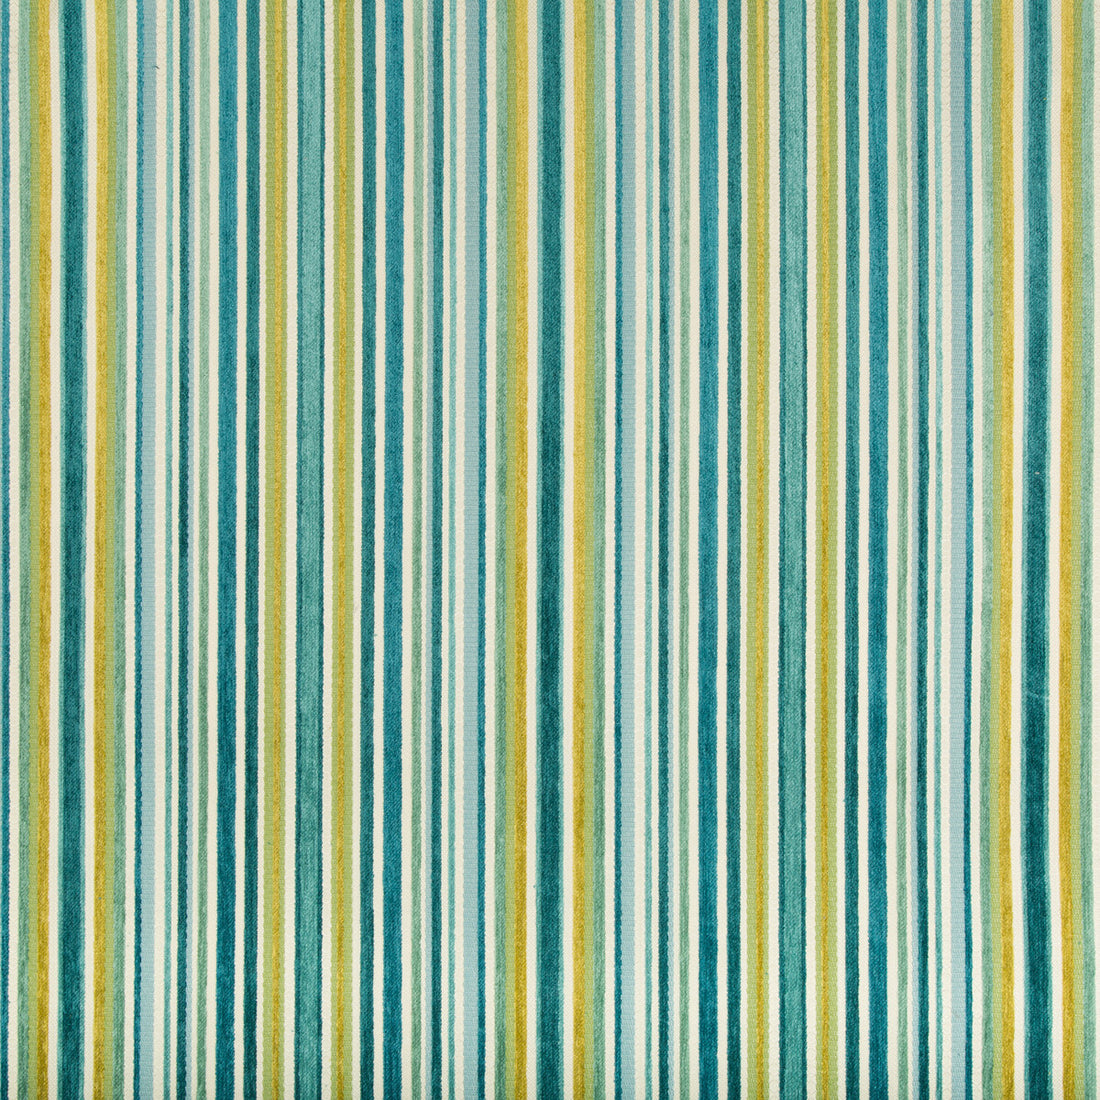 Kravet Contract fabric in 35021-523 color - pattern 35021.523.0 - by Kravet Contract in the Incase Crypton Gis collection